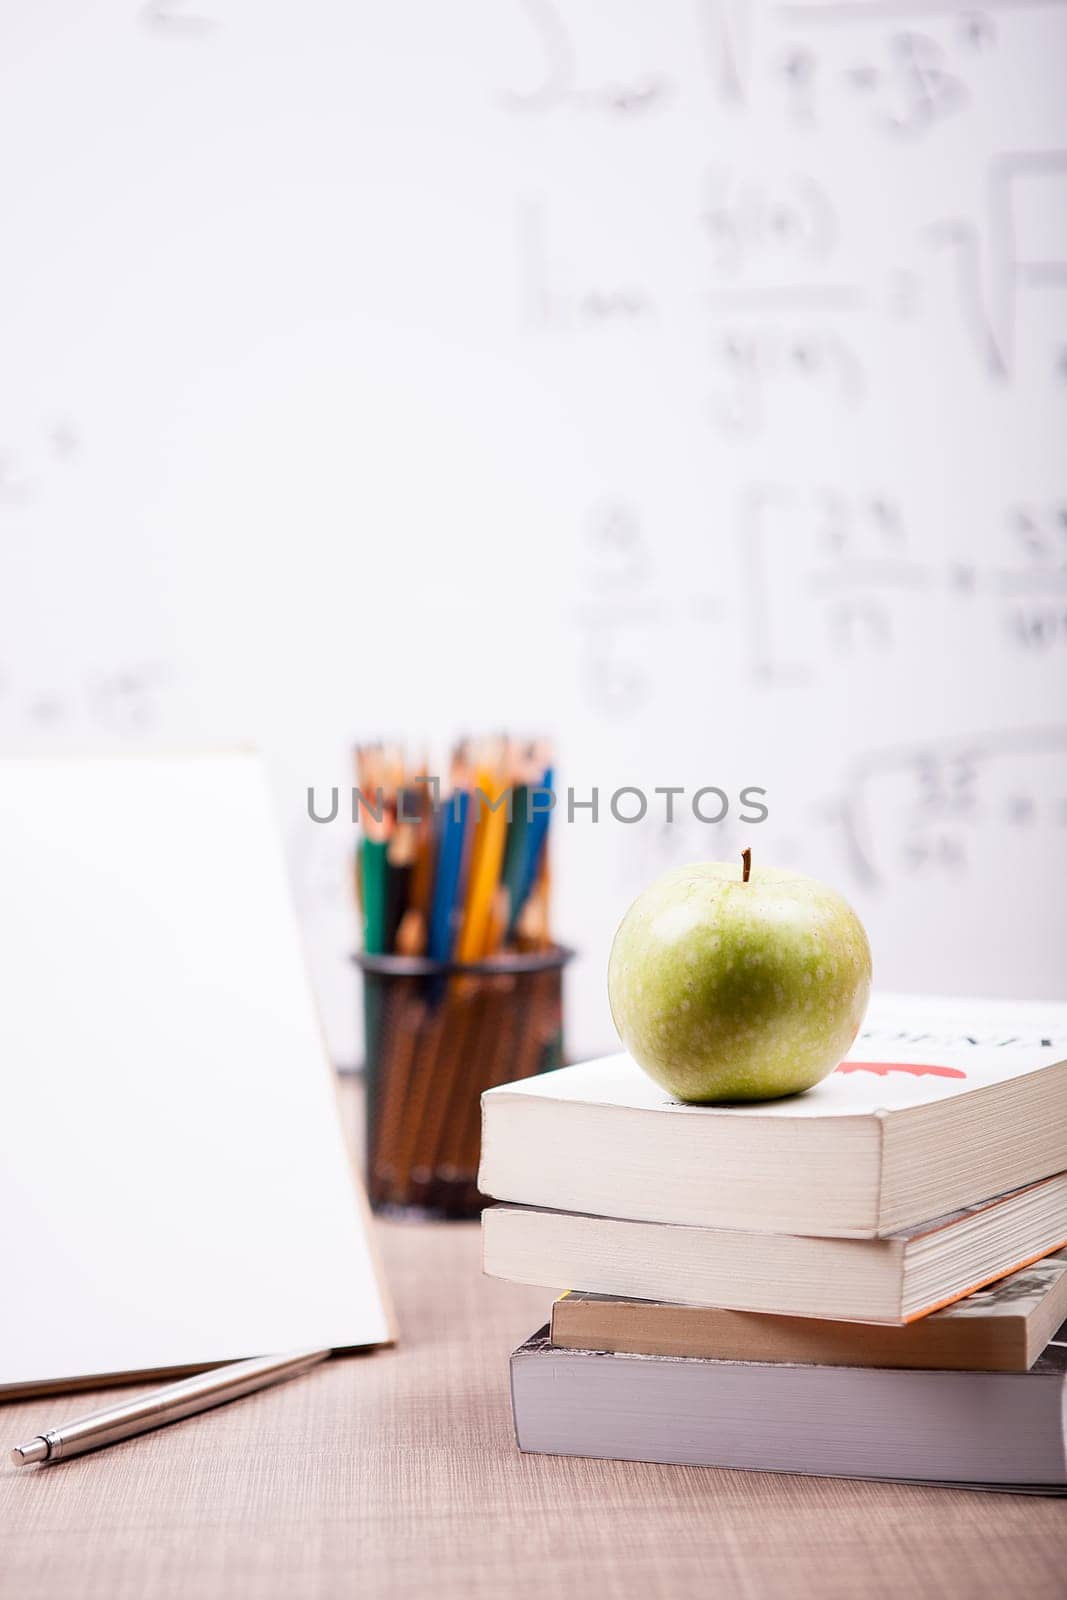 Green apple on pile of books next to a notebook and pencils on table with a blurred white board in the back. School concept